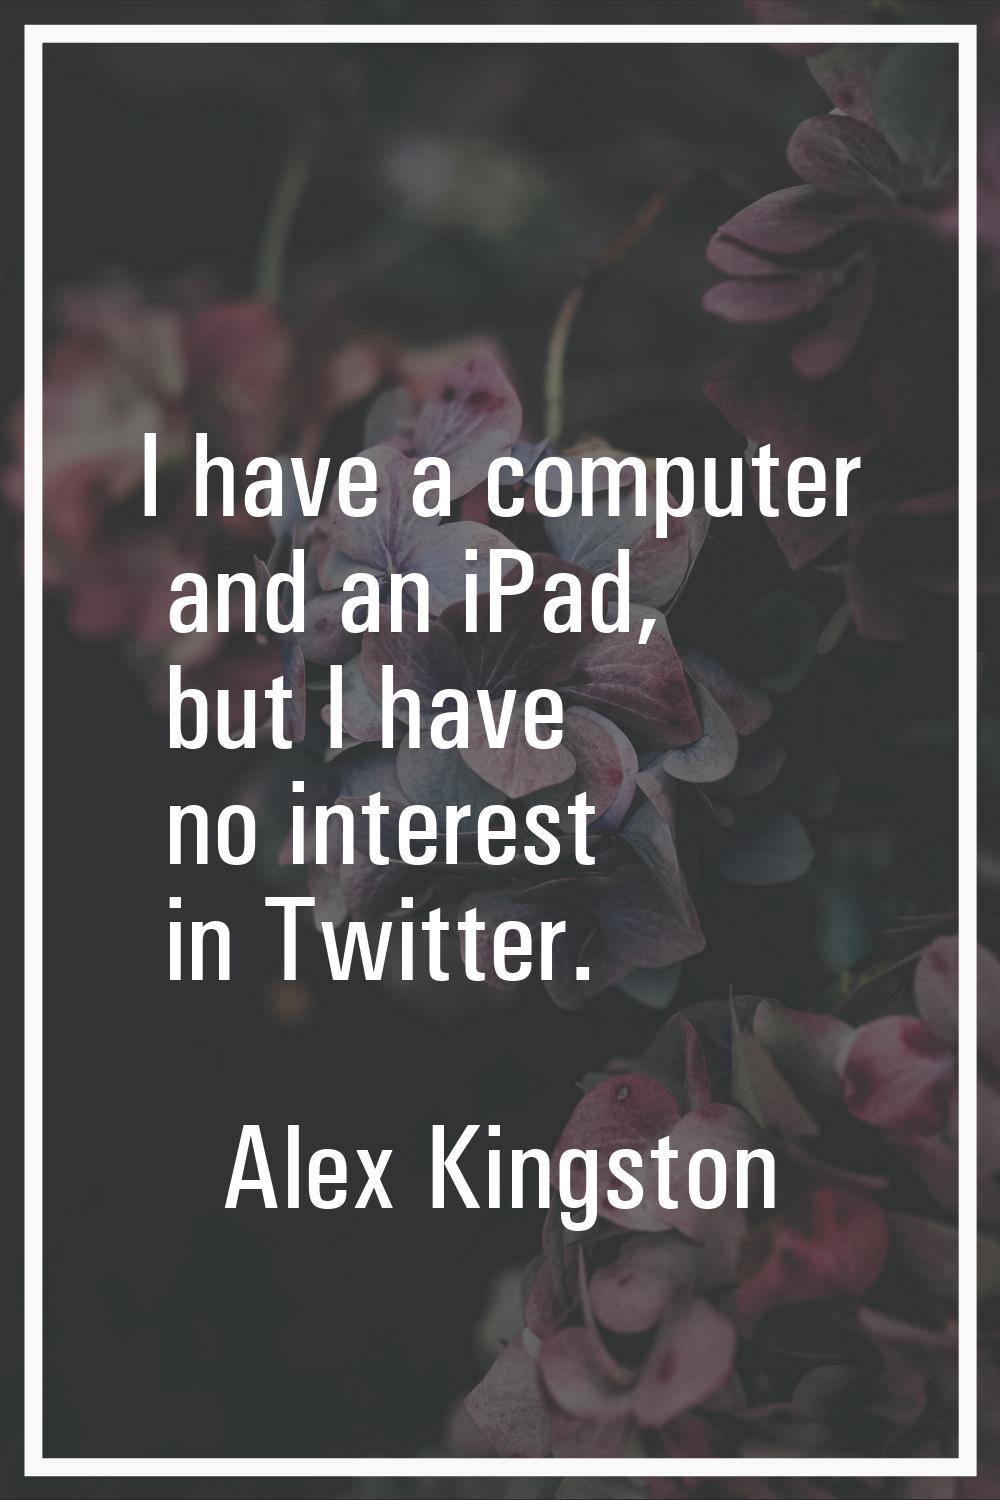 I have a computer and an iPad, but I have no interest in Twitter.